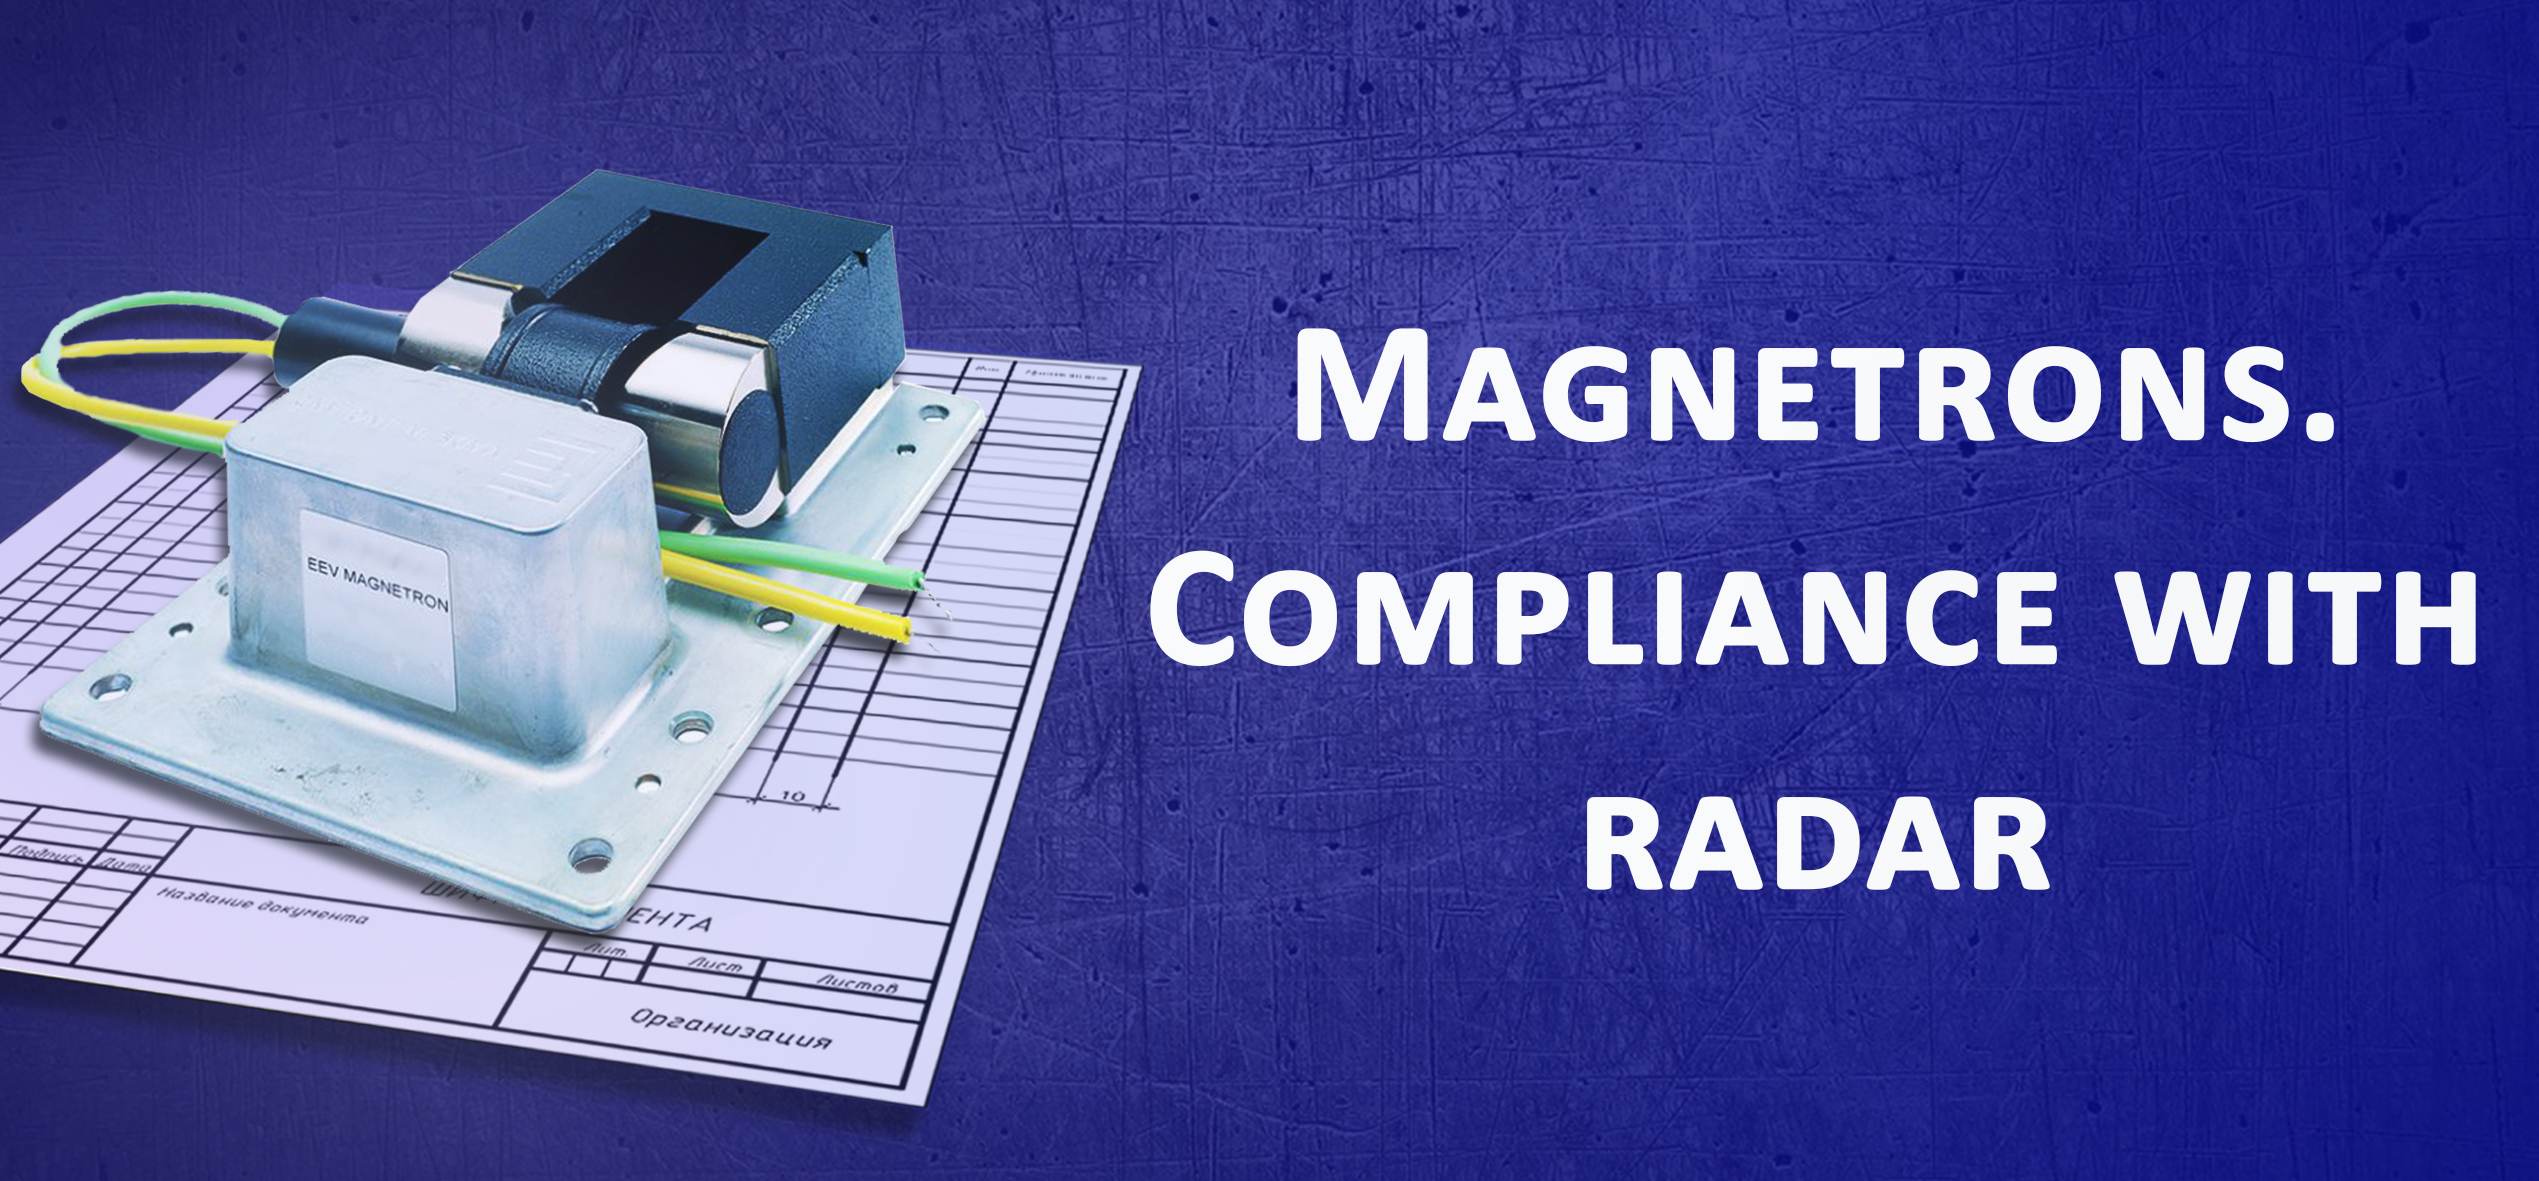 Magnetrons. Compliance with radar.